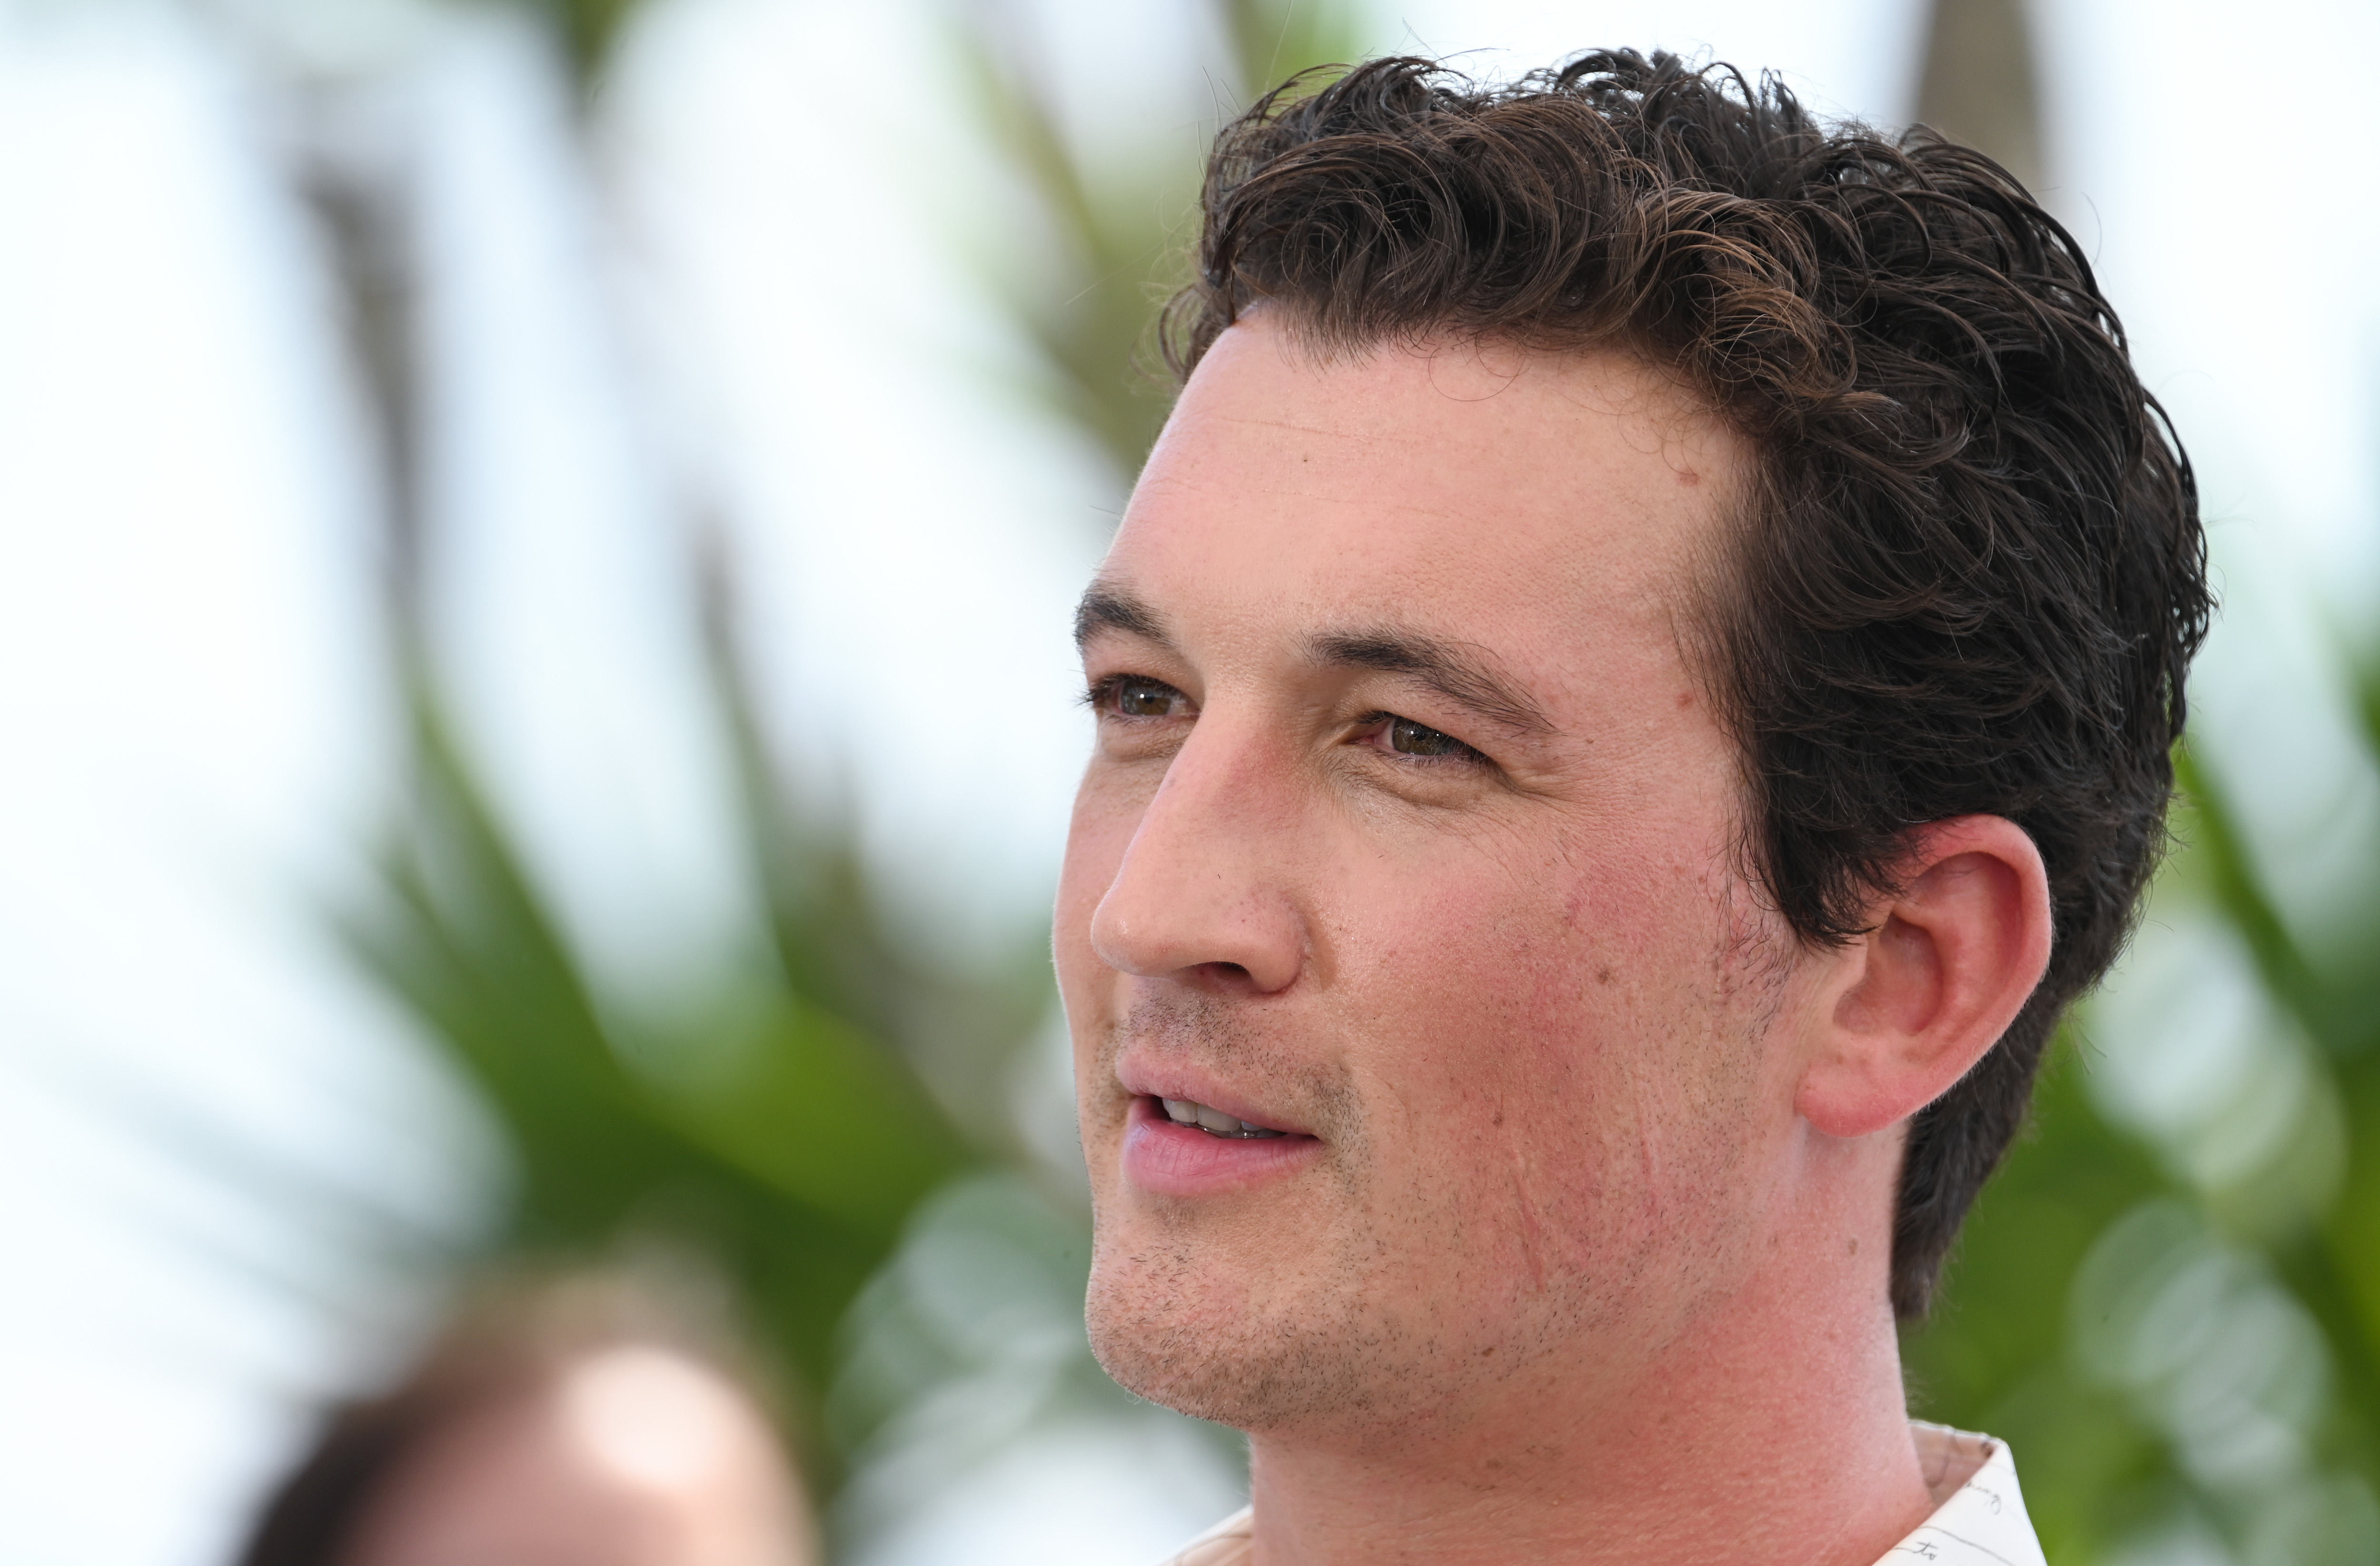 Miles Teller attends the photocall for Top Gun: Maverick at the 75th annual Cannes film festival